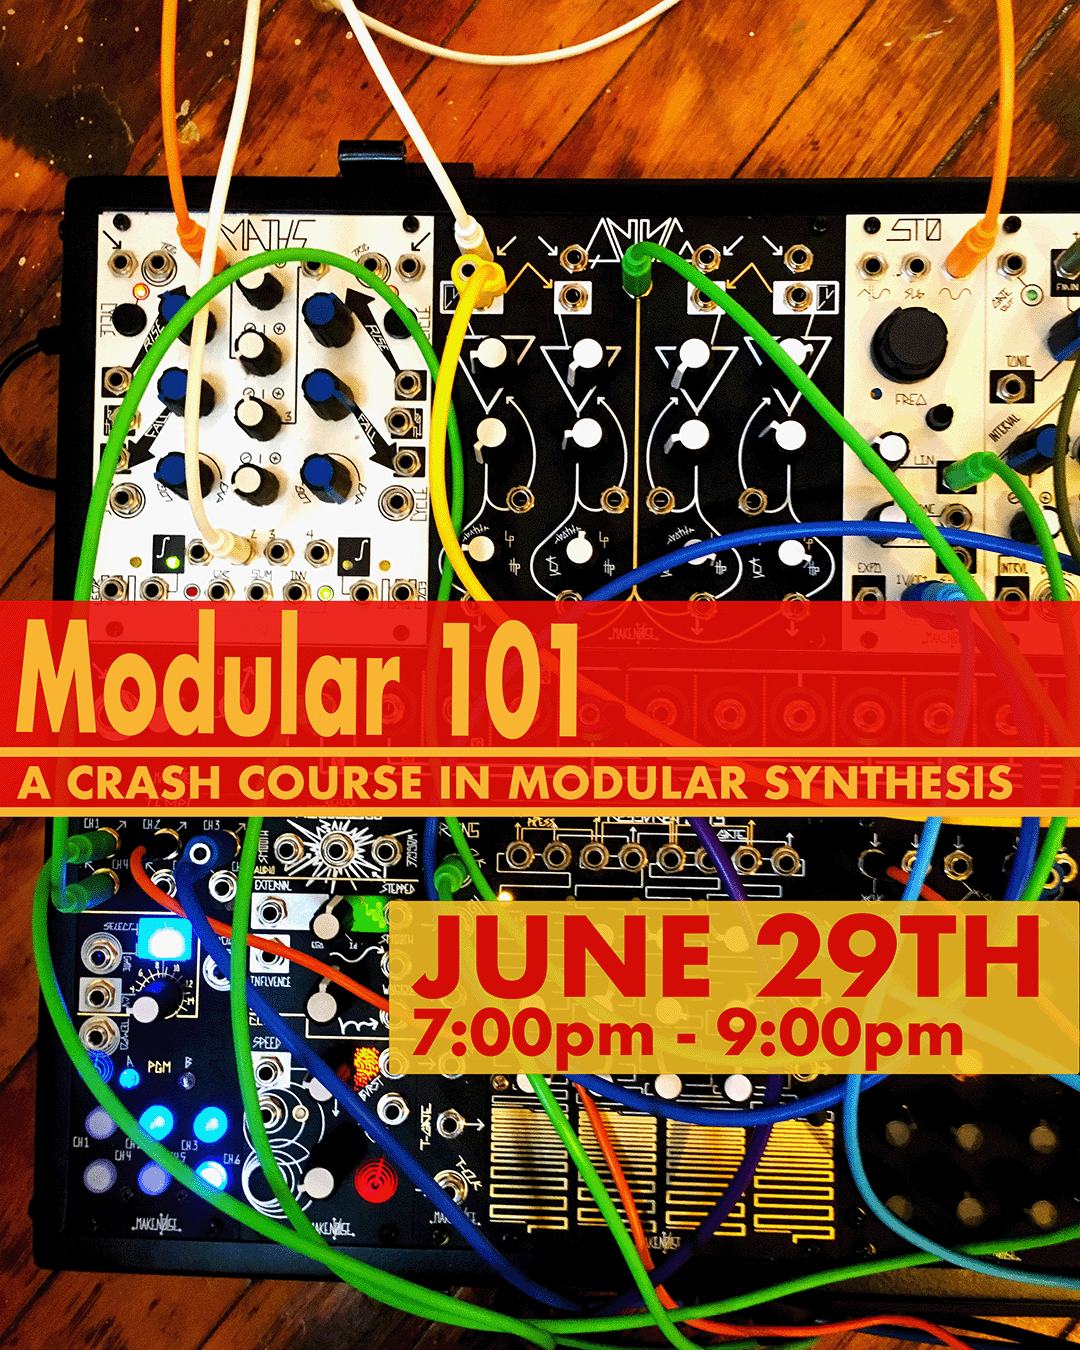 Flyer image with multicolored patch wires attached to synthesizer modules mounted together in a case. The text reads "Modular 101: A Crash Course in Modular Synthesis / June 29th / 7:00 p.m.–9:00 p.m."